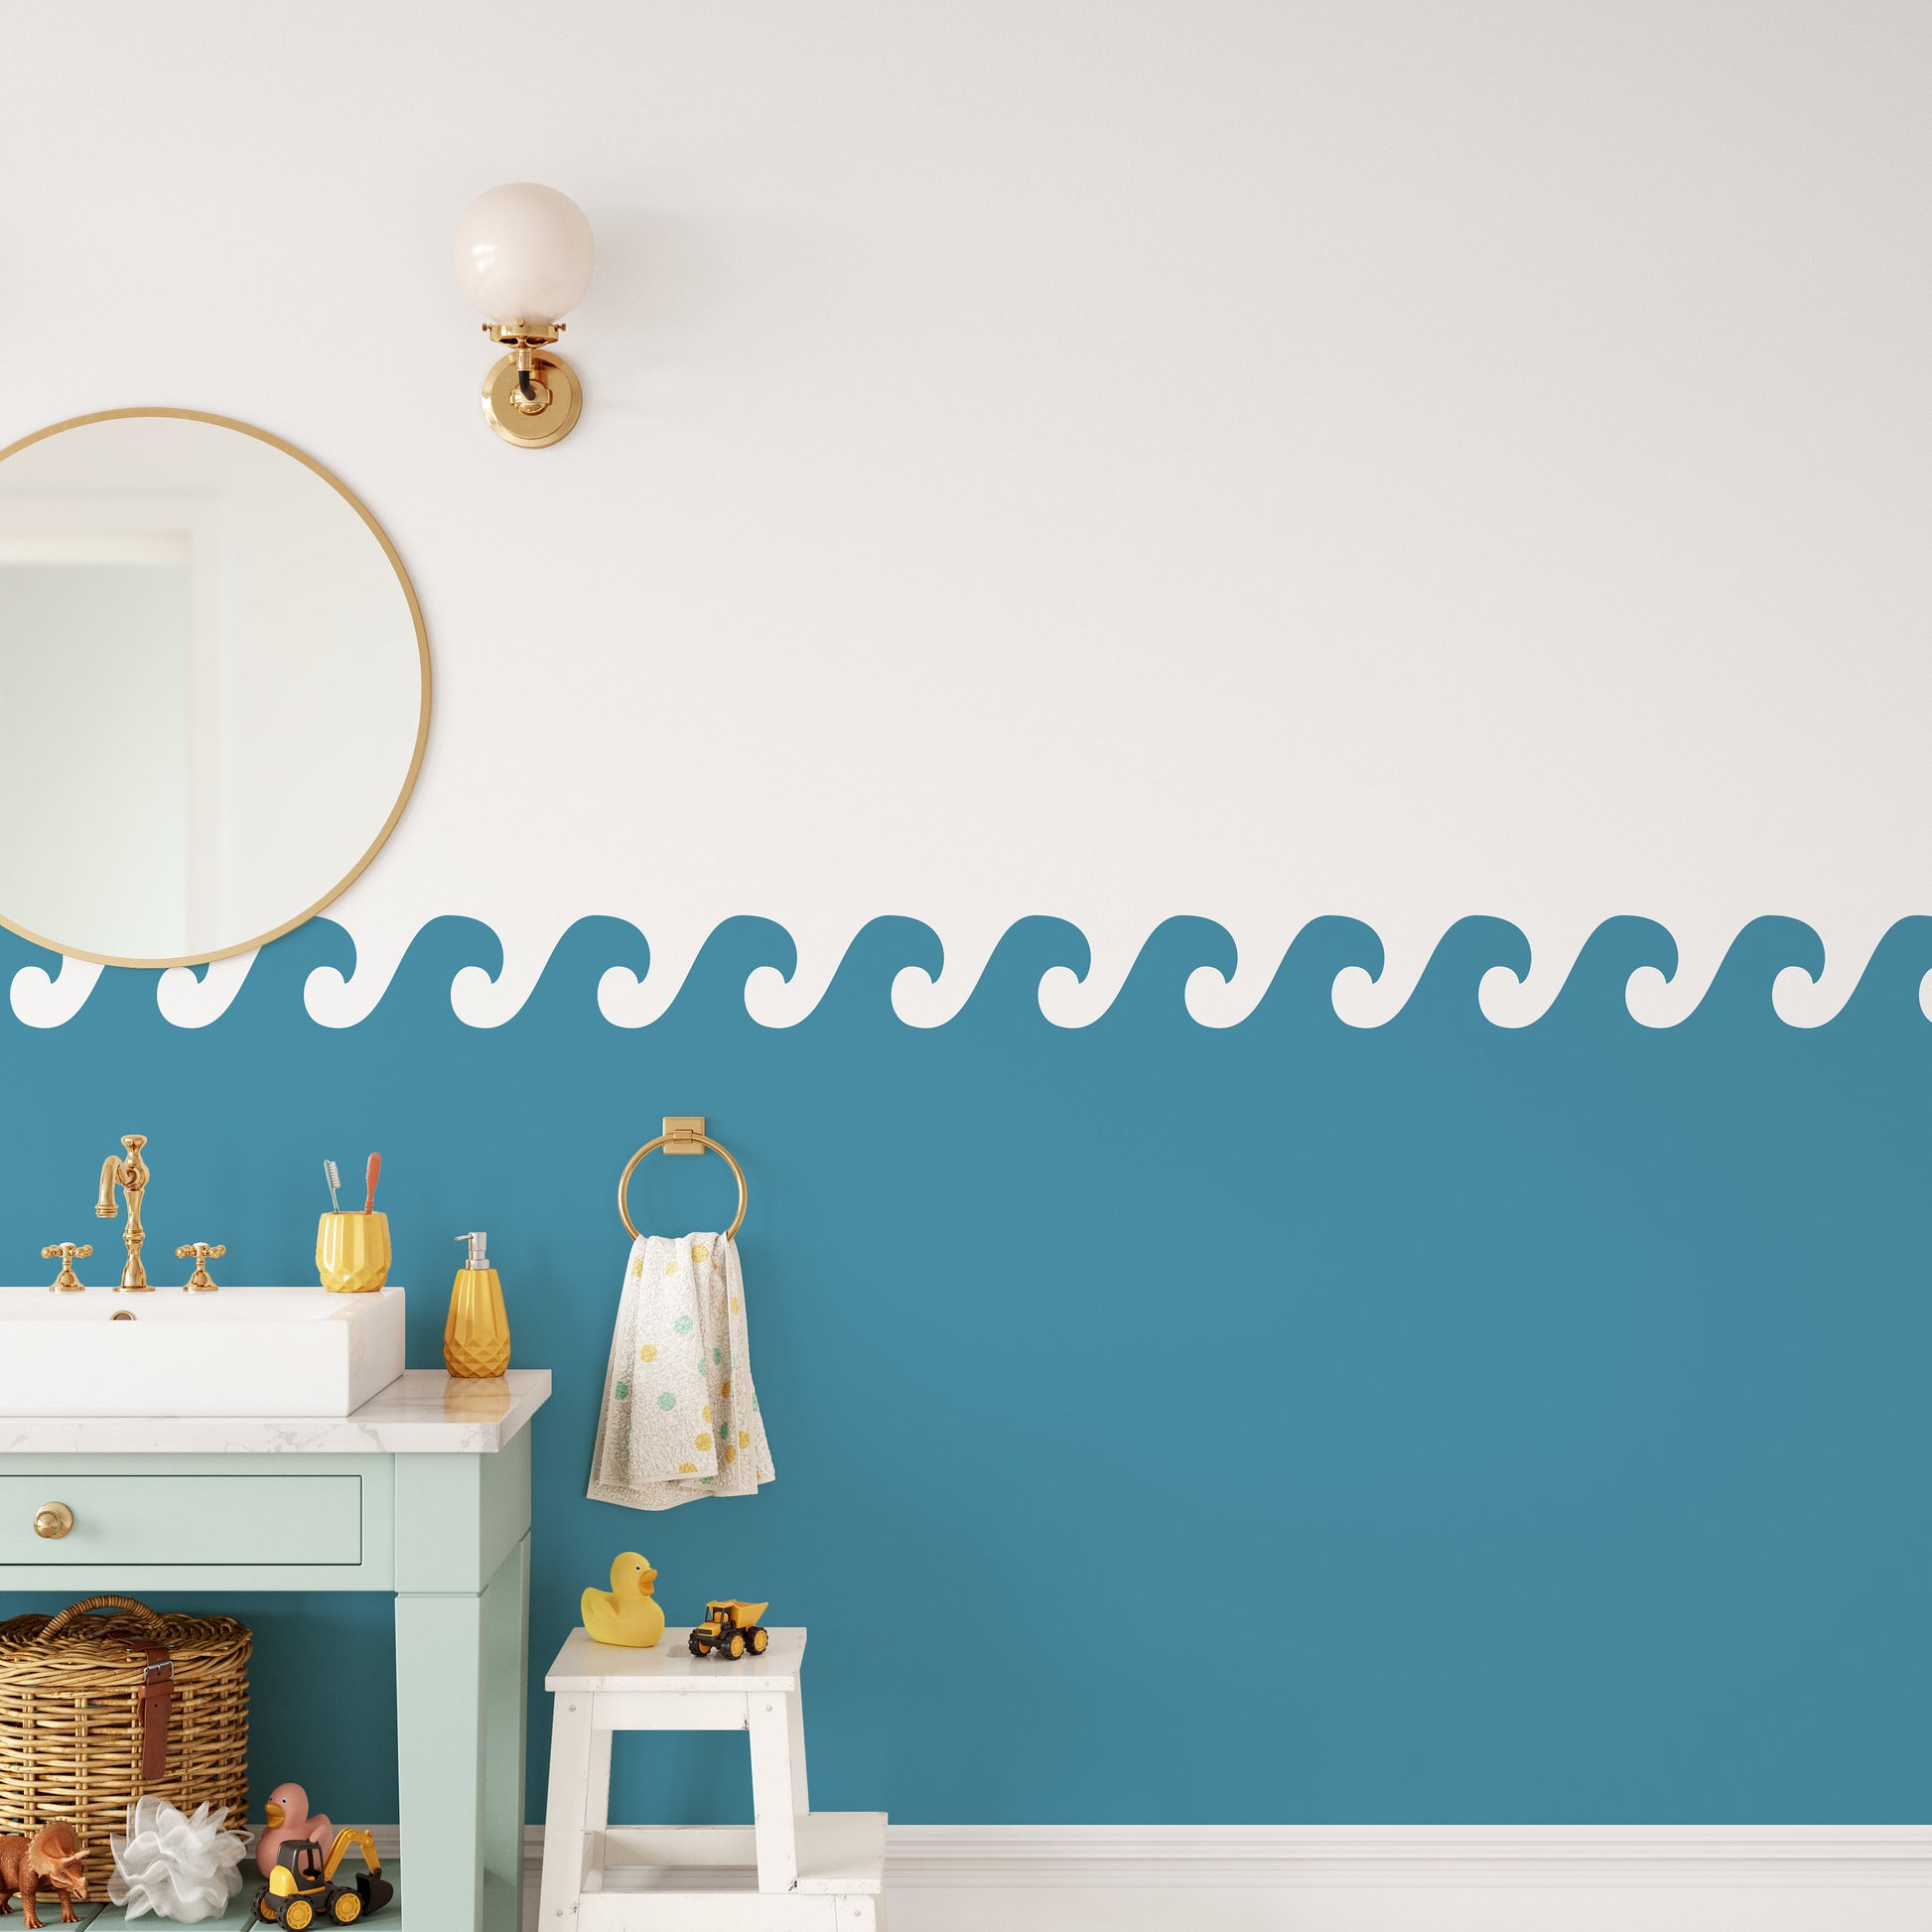 Sea Waves Wall Painting Stencil, Wall Stencils For Painting, Wall Paint Border, 2 Tone Wall Edging Decor For Home Kids Nursery